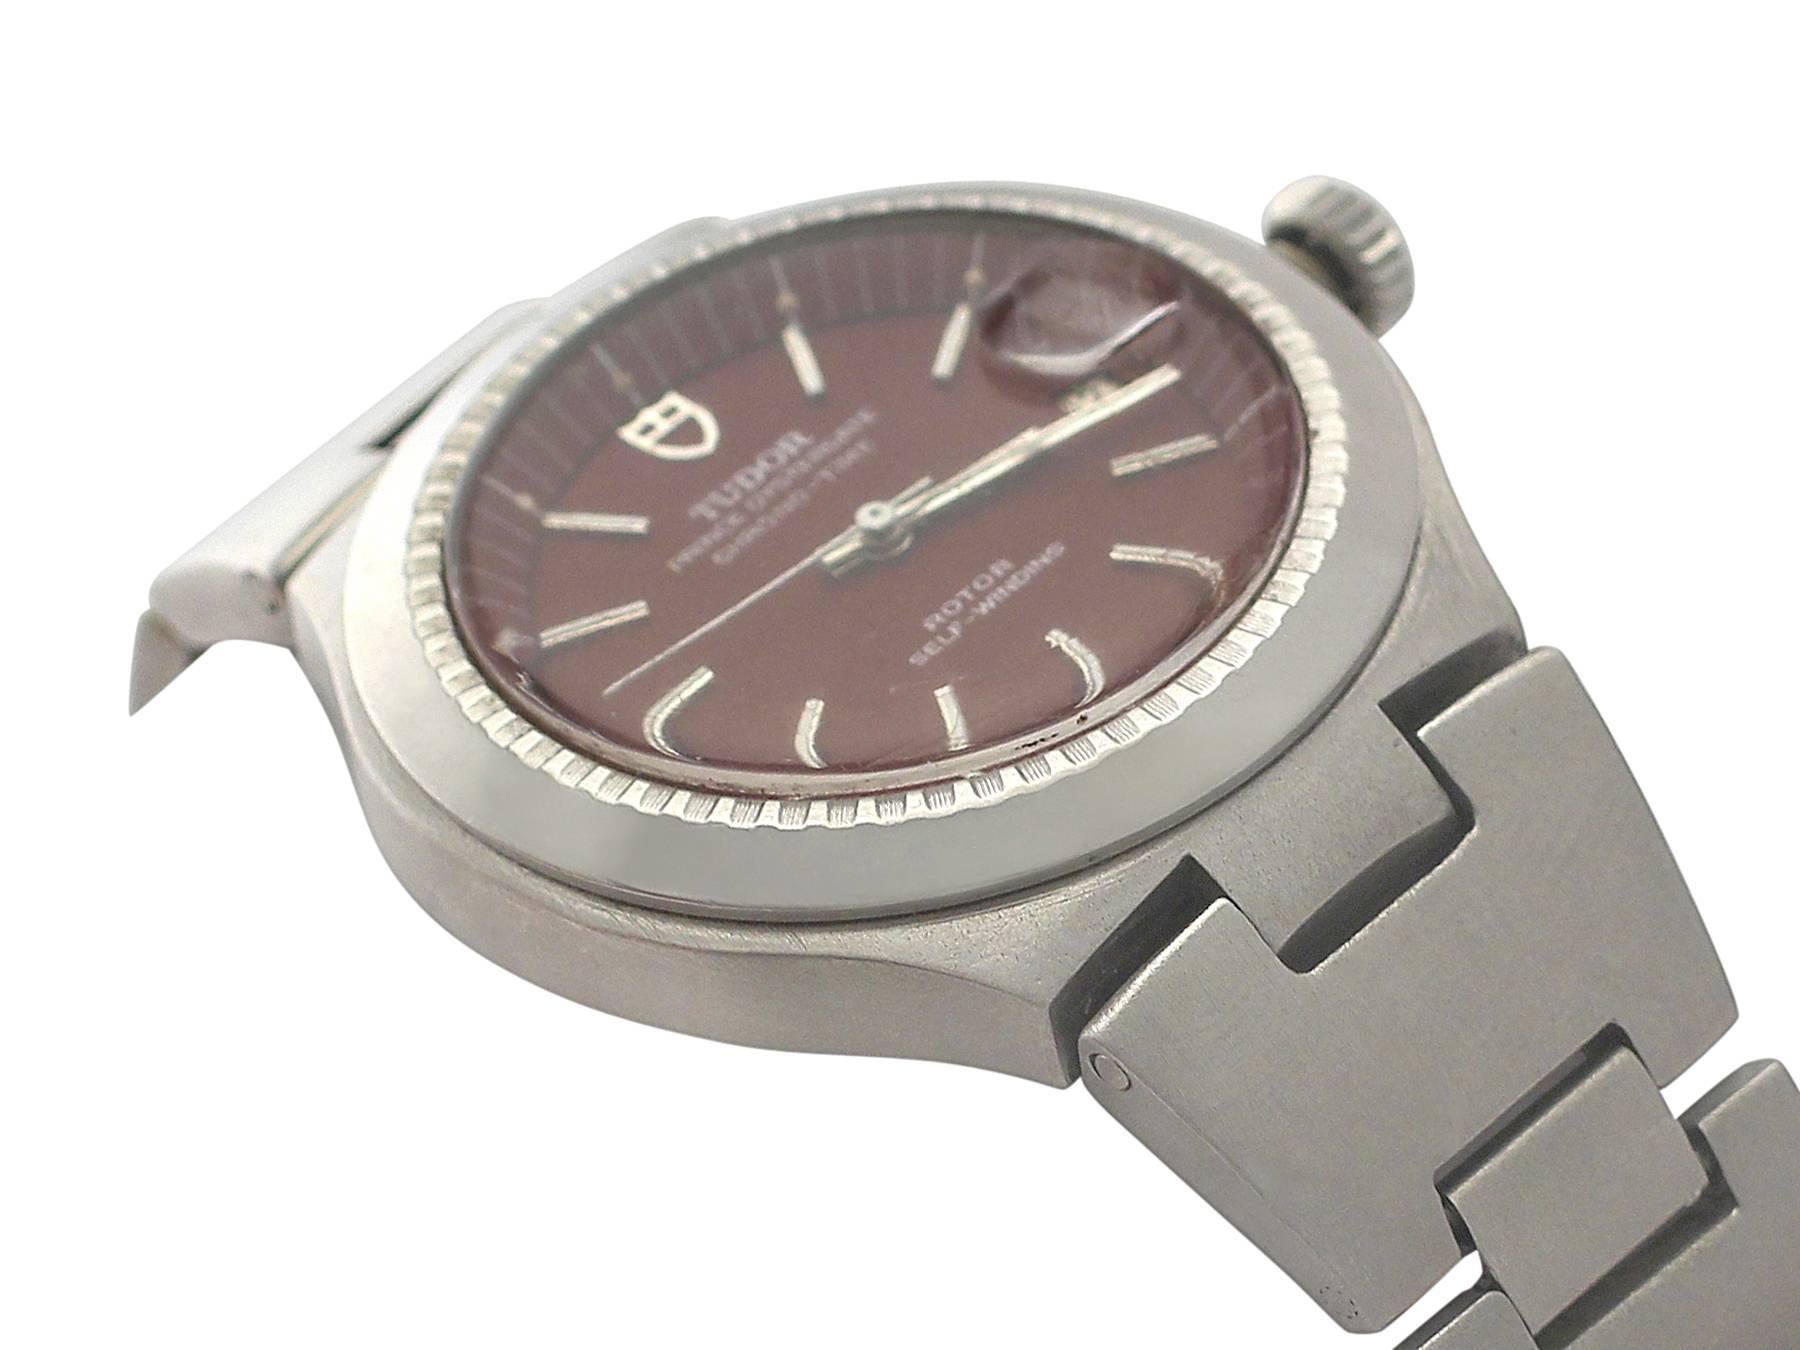 An authentic vintage Tudor Prince Oysterdate gent's wrist watch in stainless steel; part of our vintage and pre-owned watch collection

This fine vintage Tudor* gentleman's watch has a genuine stainless steel Rolex Oyster case.

The unusual